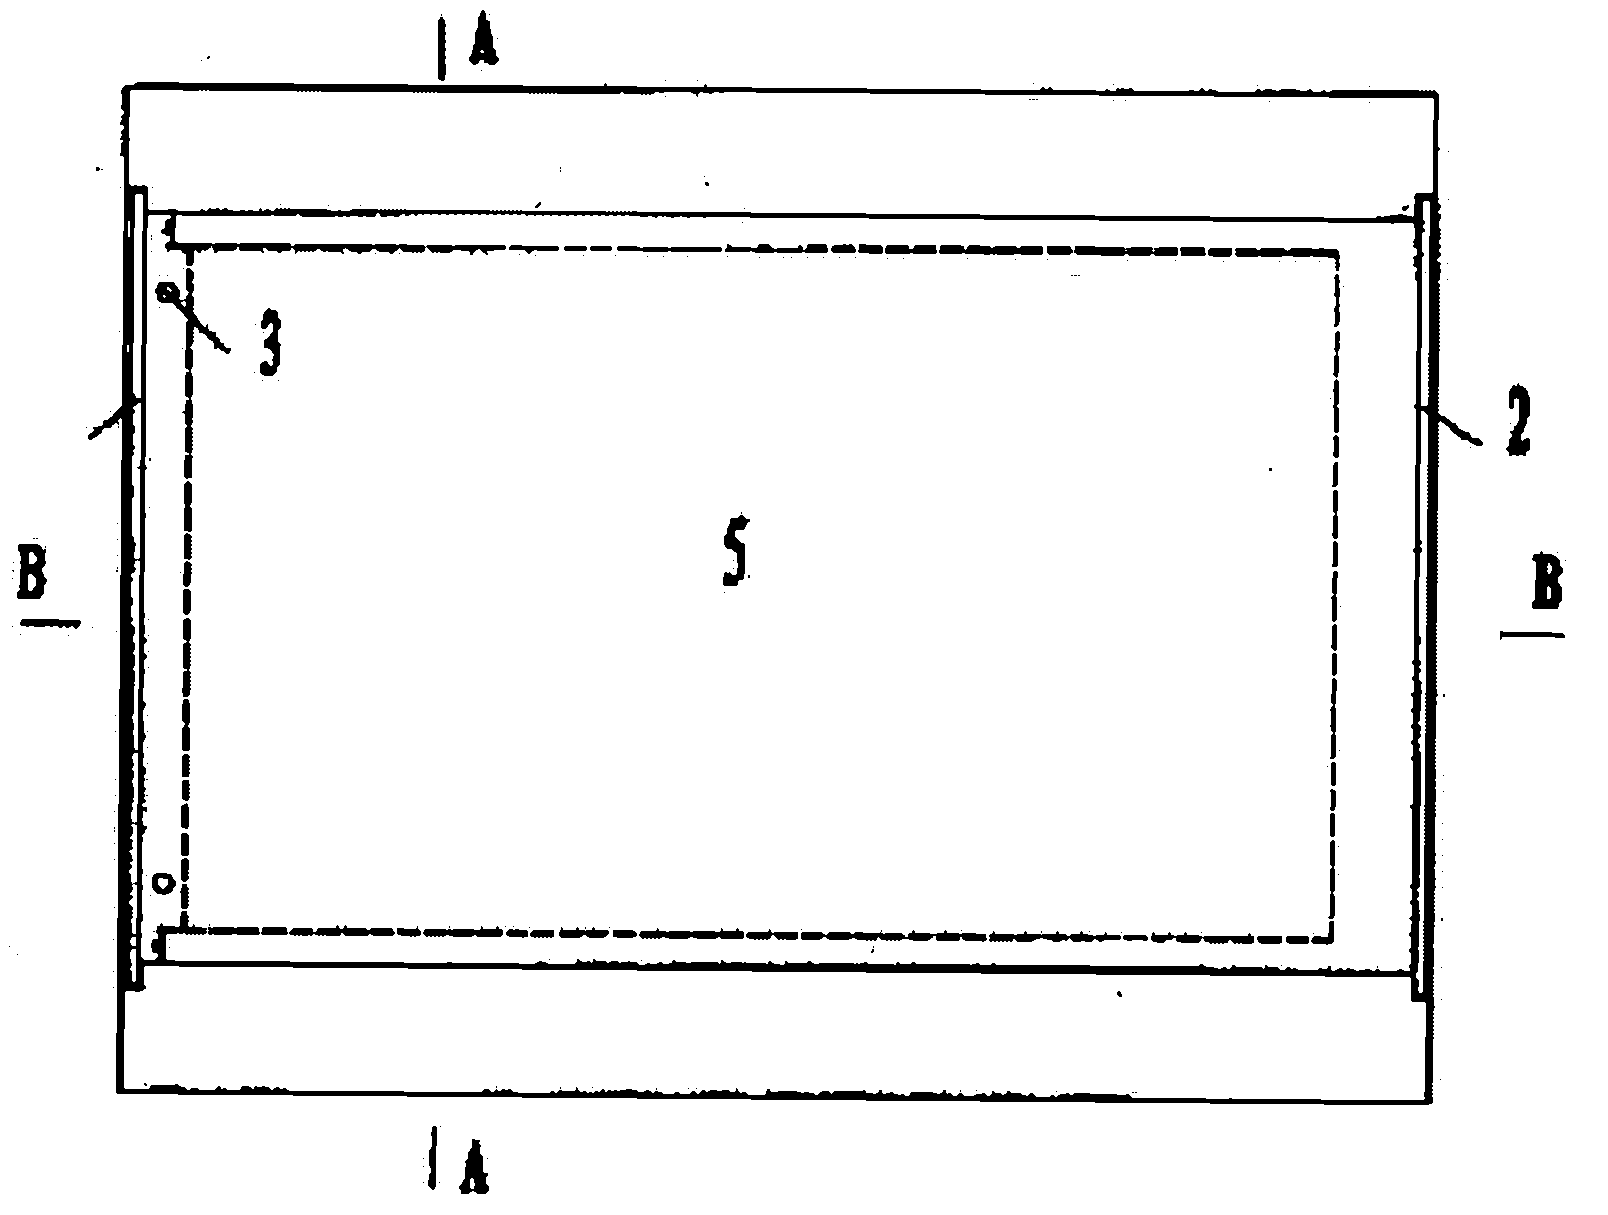 Steel caisson enclosure structure at island-tunnel combination part